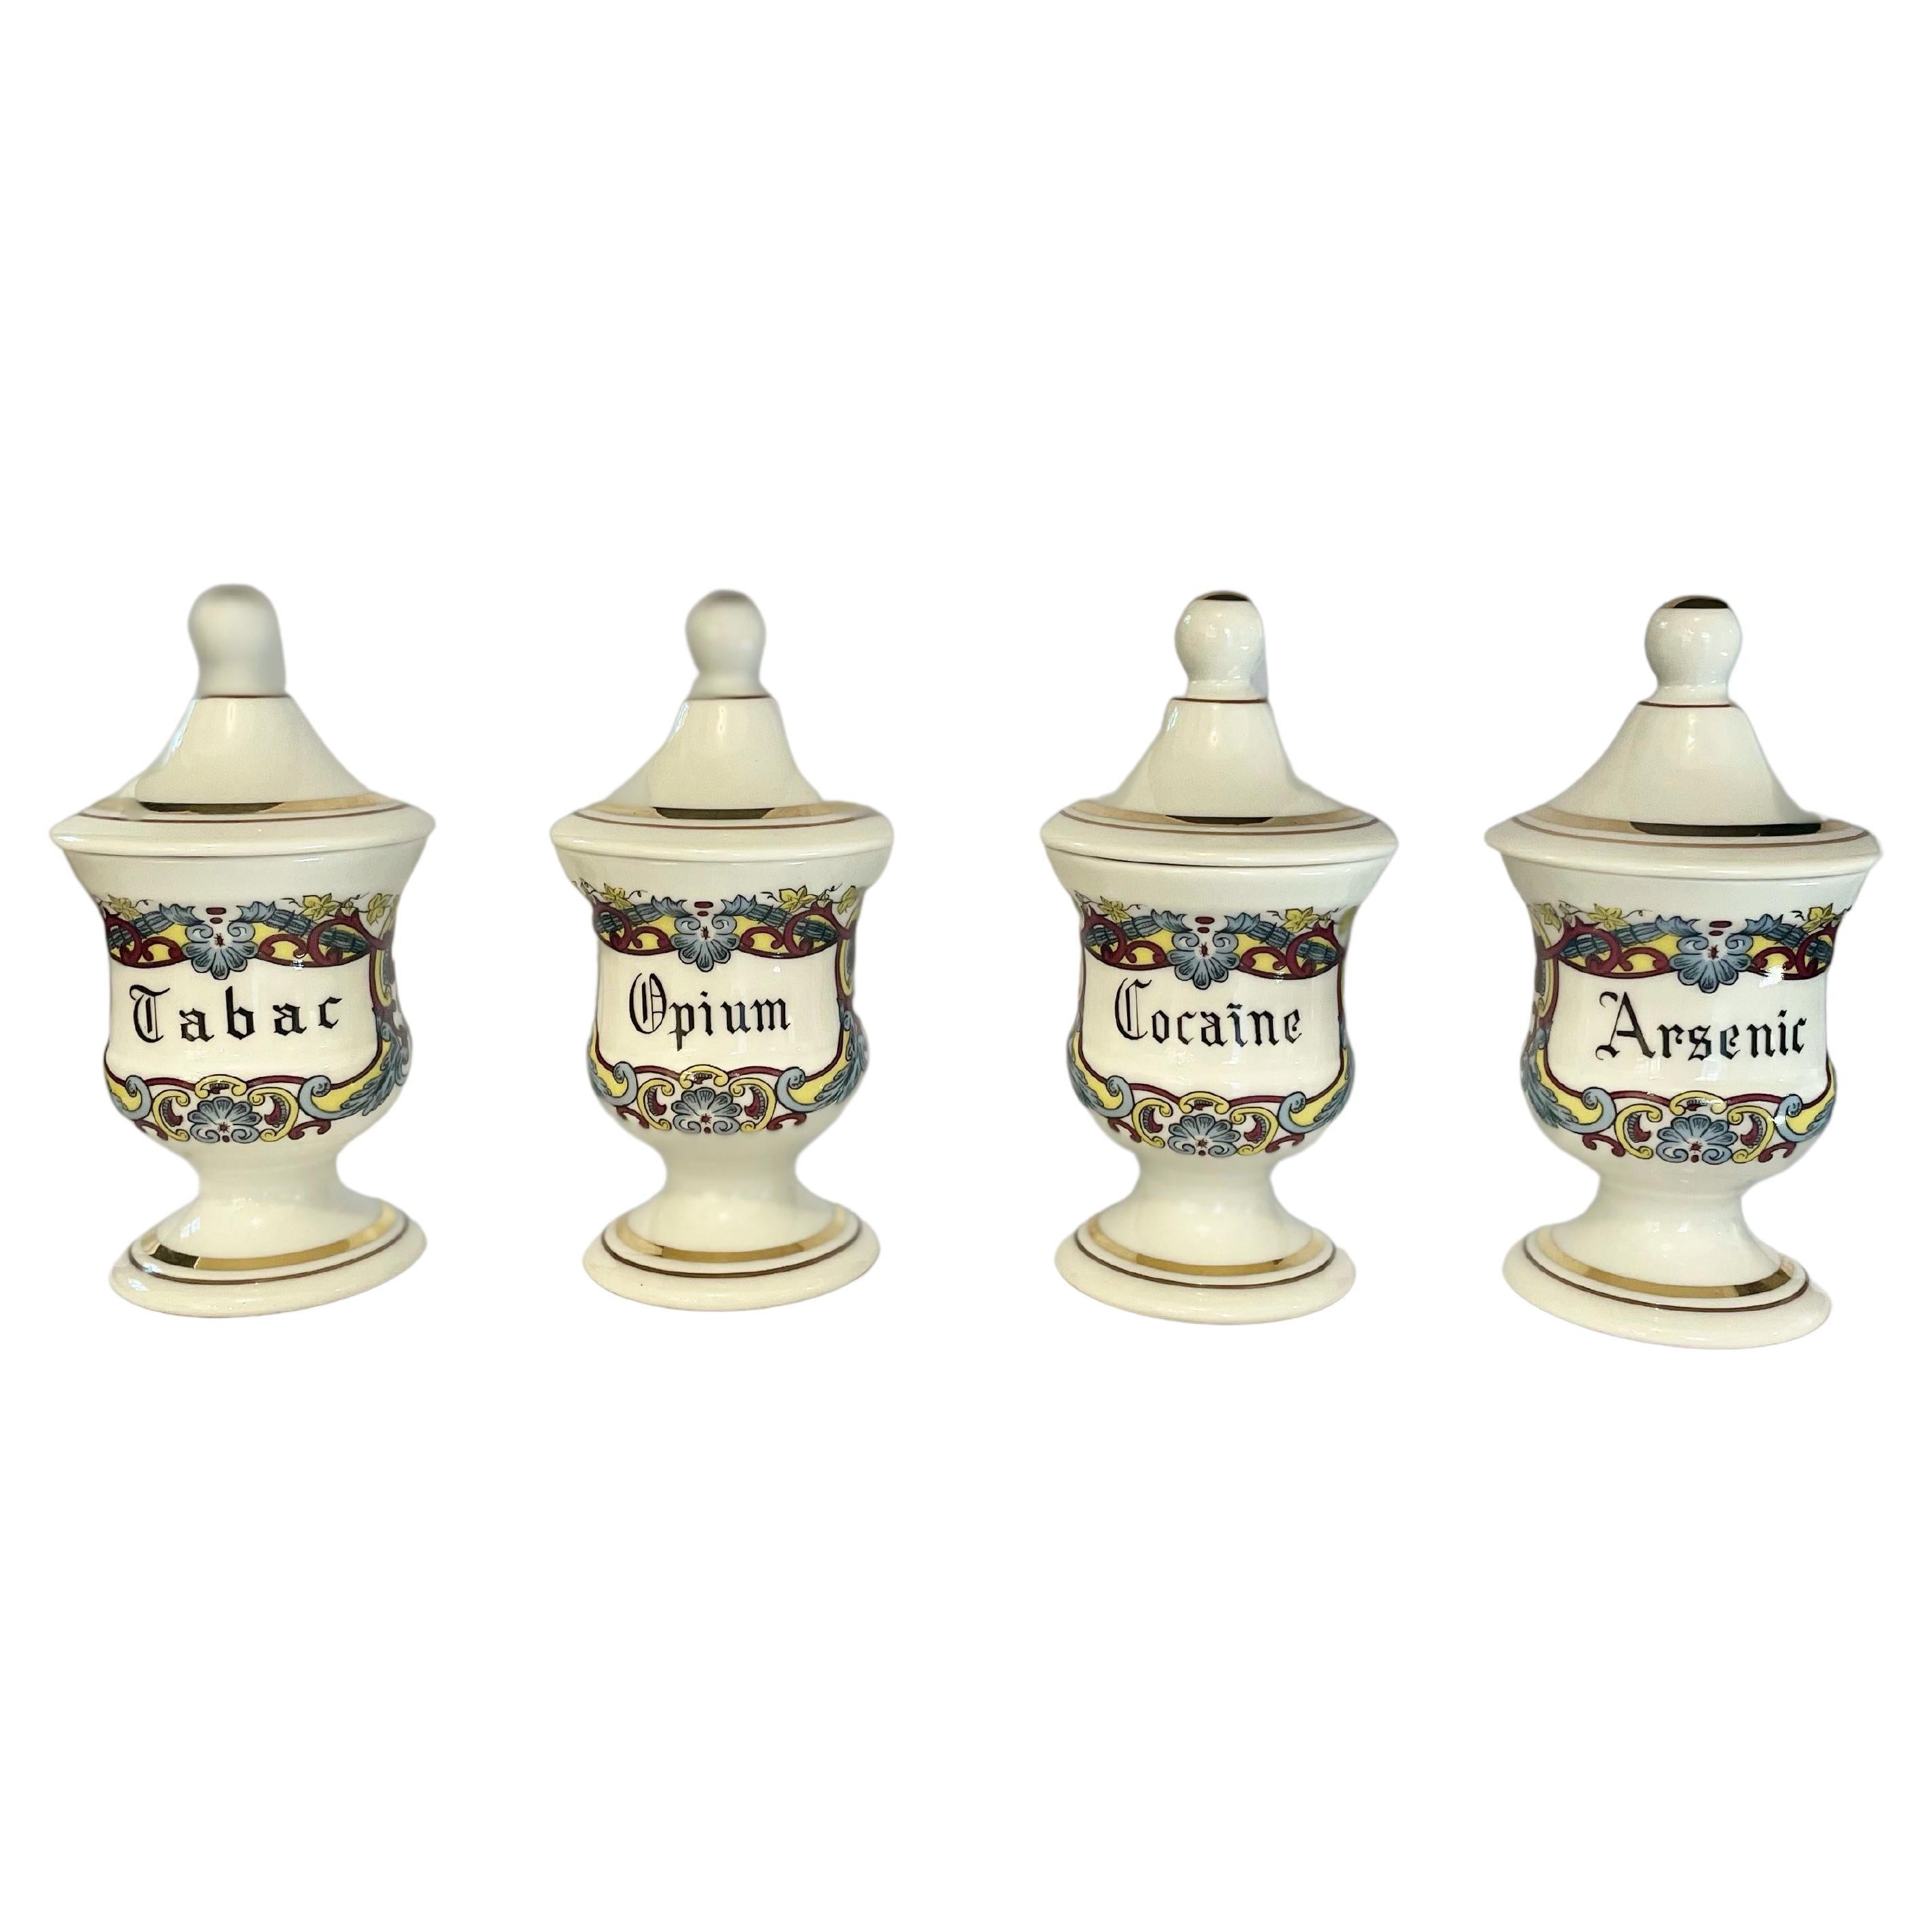 Set 4 French Apothecary Jars Cocaine Opium Arsenic Tabac 19th Porcelain Limoges 4